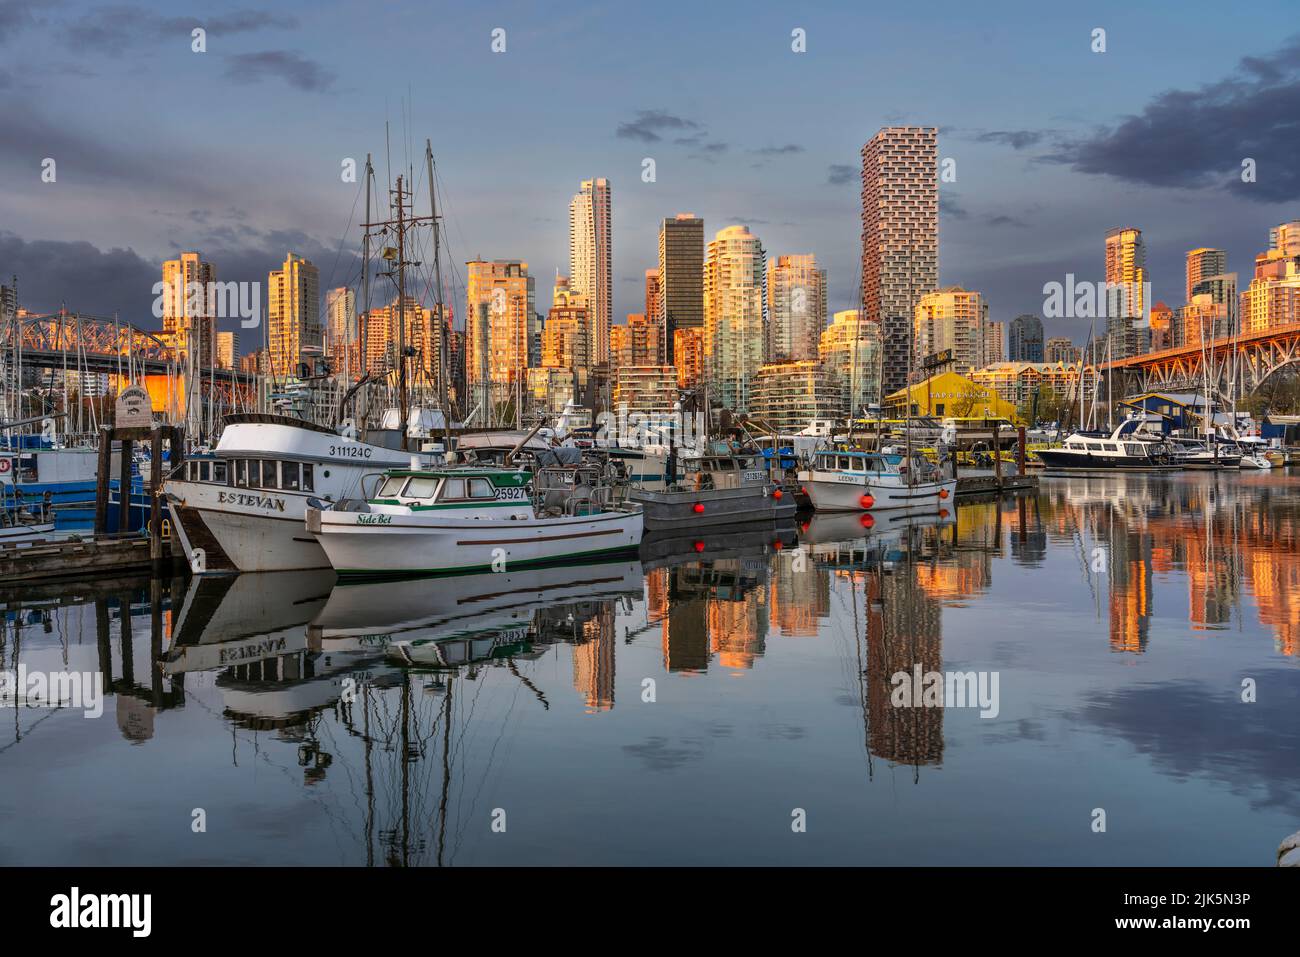 False Creek with reflections of boats and buildings in Vancouver, British Columbia, Canada. Stock Photo